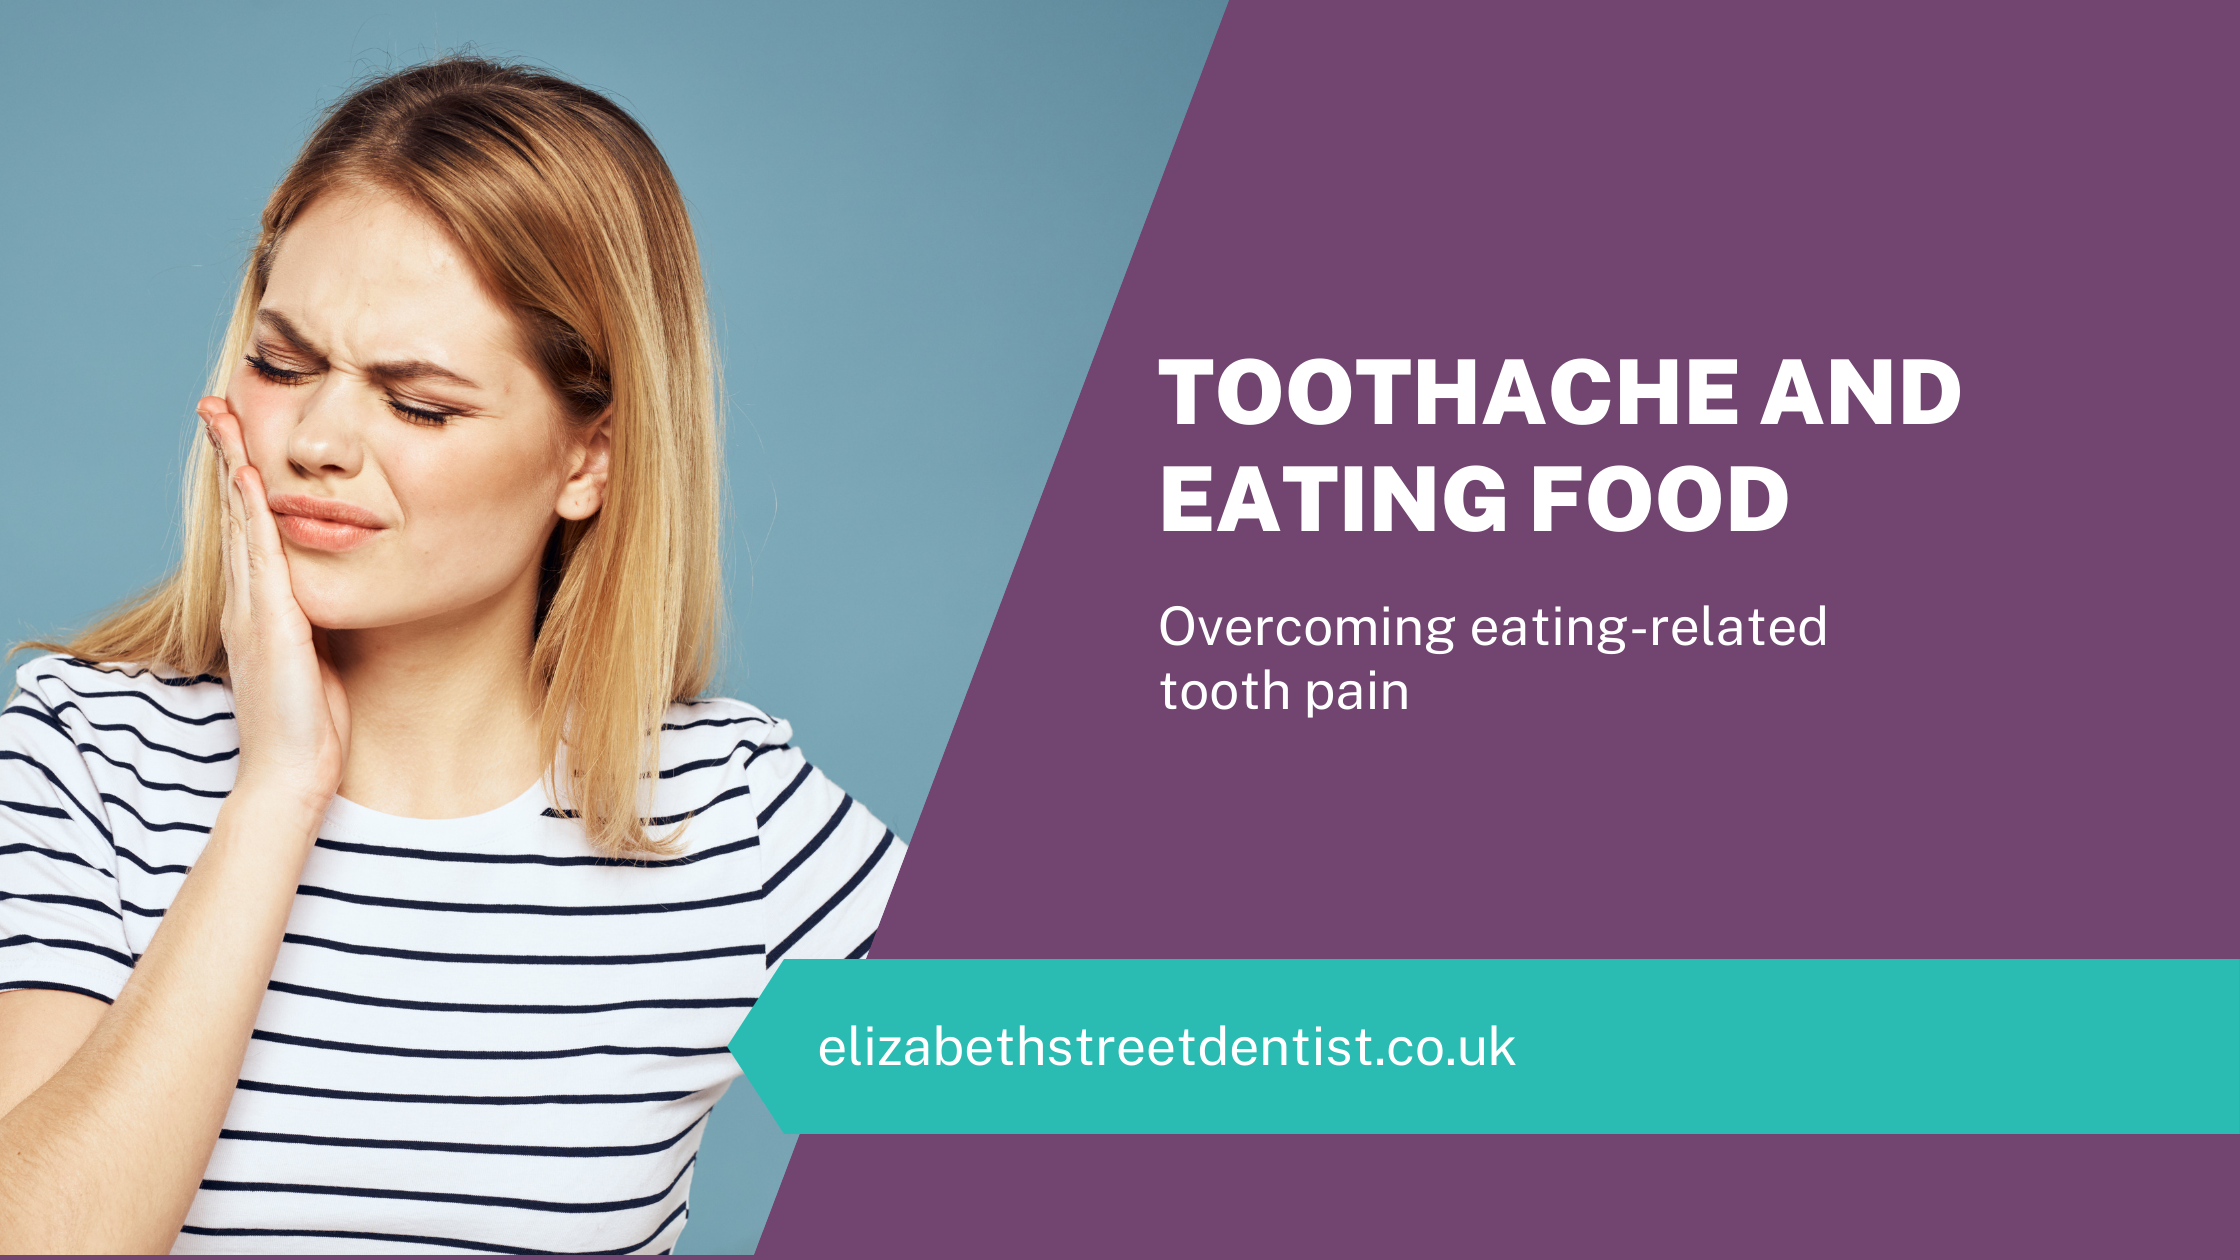 https://elizabethstreetdentist.co.uk/wp-content/uploads/2022/05/Toothache-and-eating-food-1.png